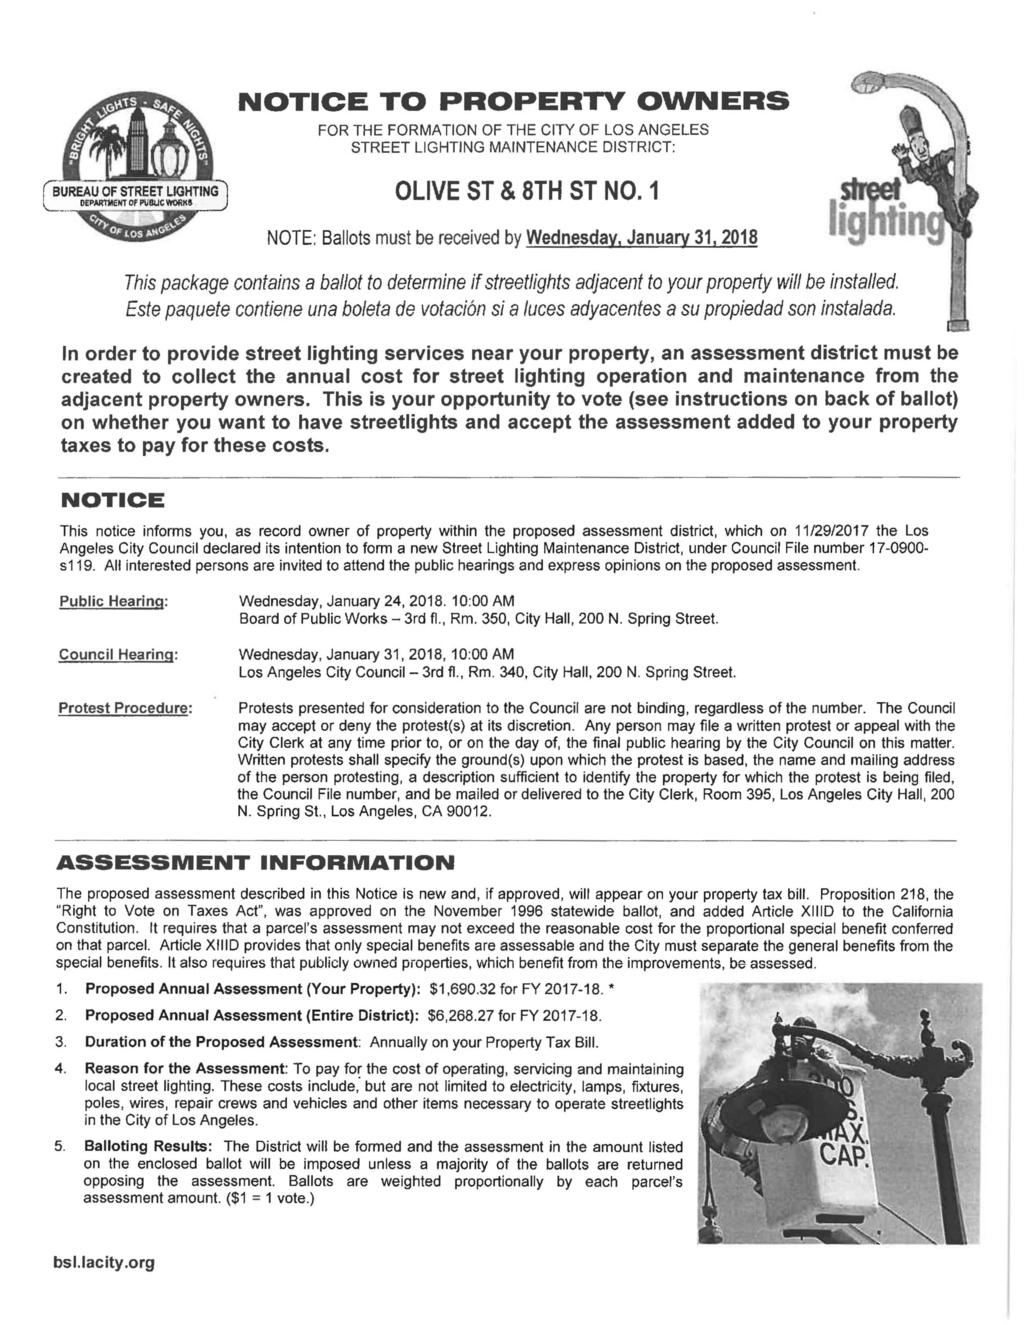 NOTICE TO PROPERTY OWNERS FOR THE FORMATION OF THE CITY OF LOS ANGELES STREET LIGHTING MAINTENANCE DISTRICT: 1 1 fbureauof STREET LIGHTING DEPARTMENT Of PUBLIC WORKS OLIVE ST & 8TH ST NO.